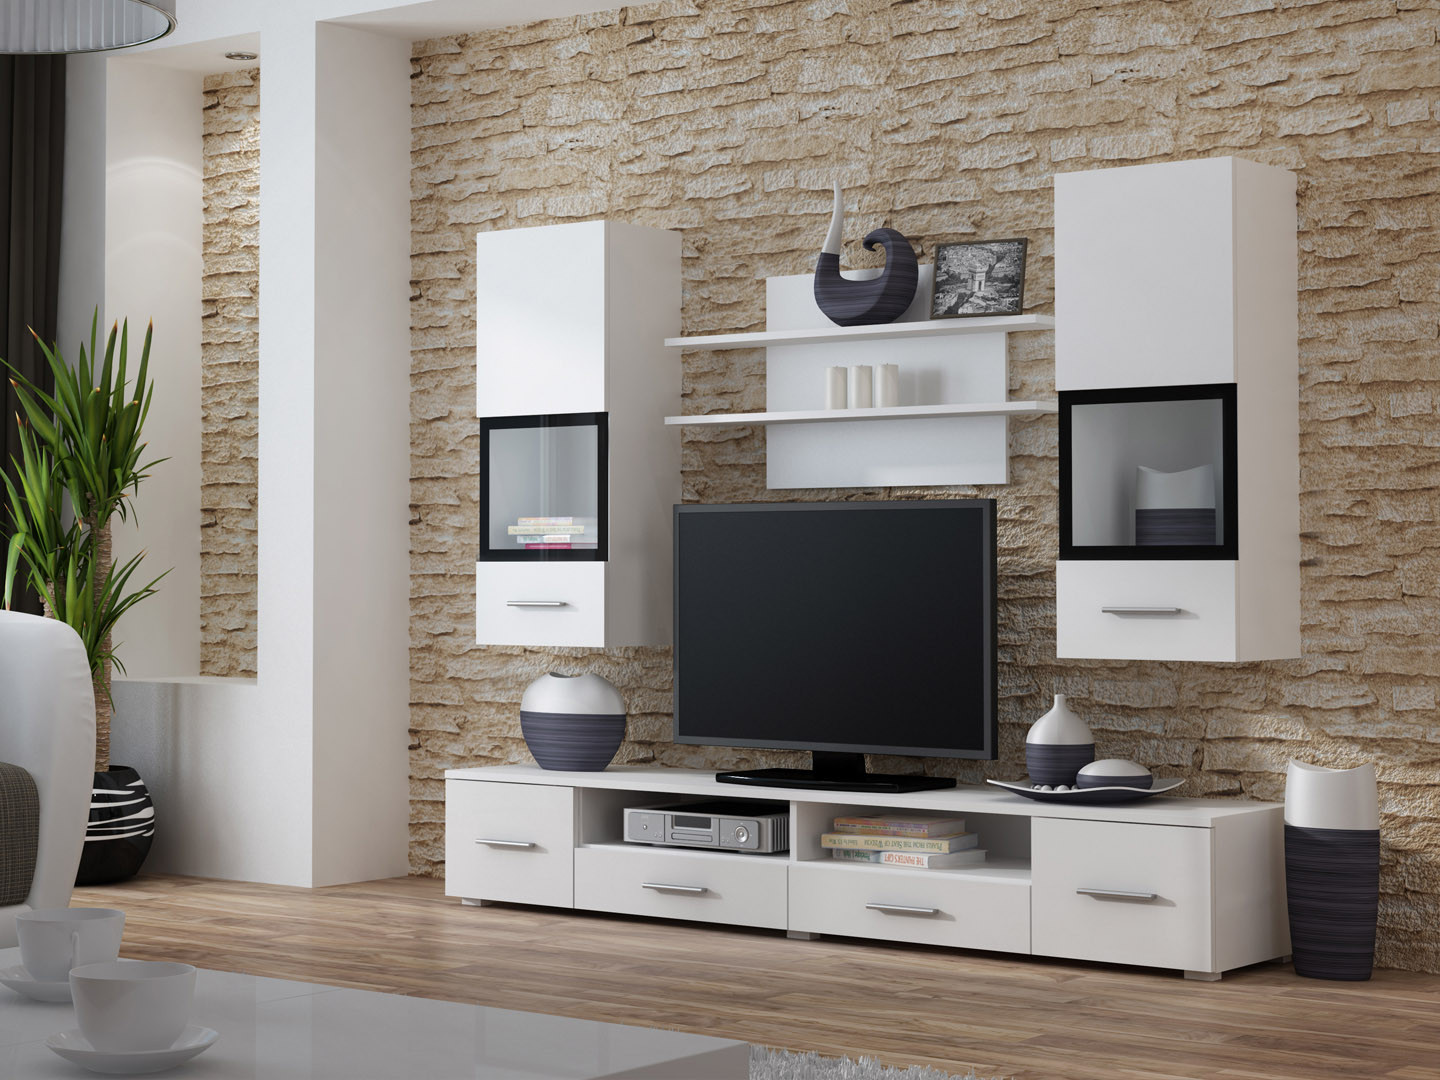 Wall Unit Living Room
 Alto 1 living room white wall unit entertainment center cabinet tv stand